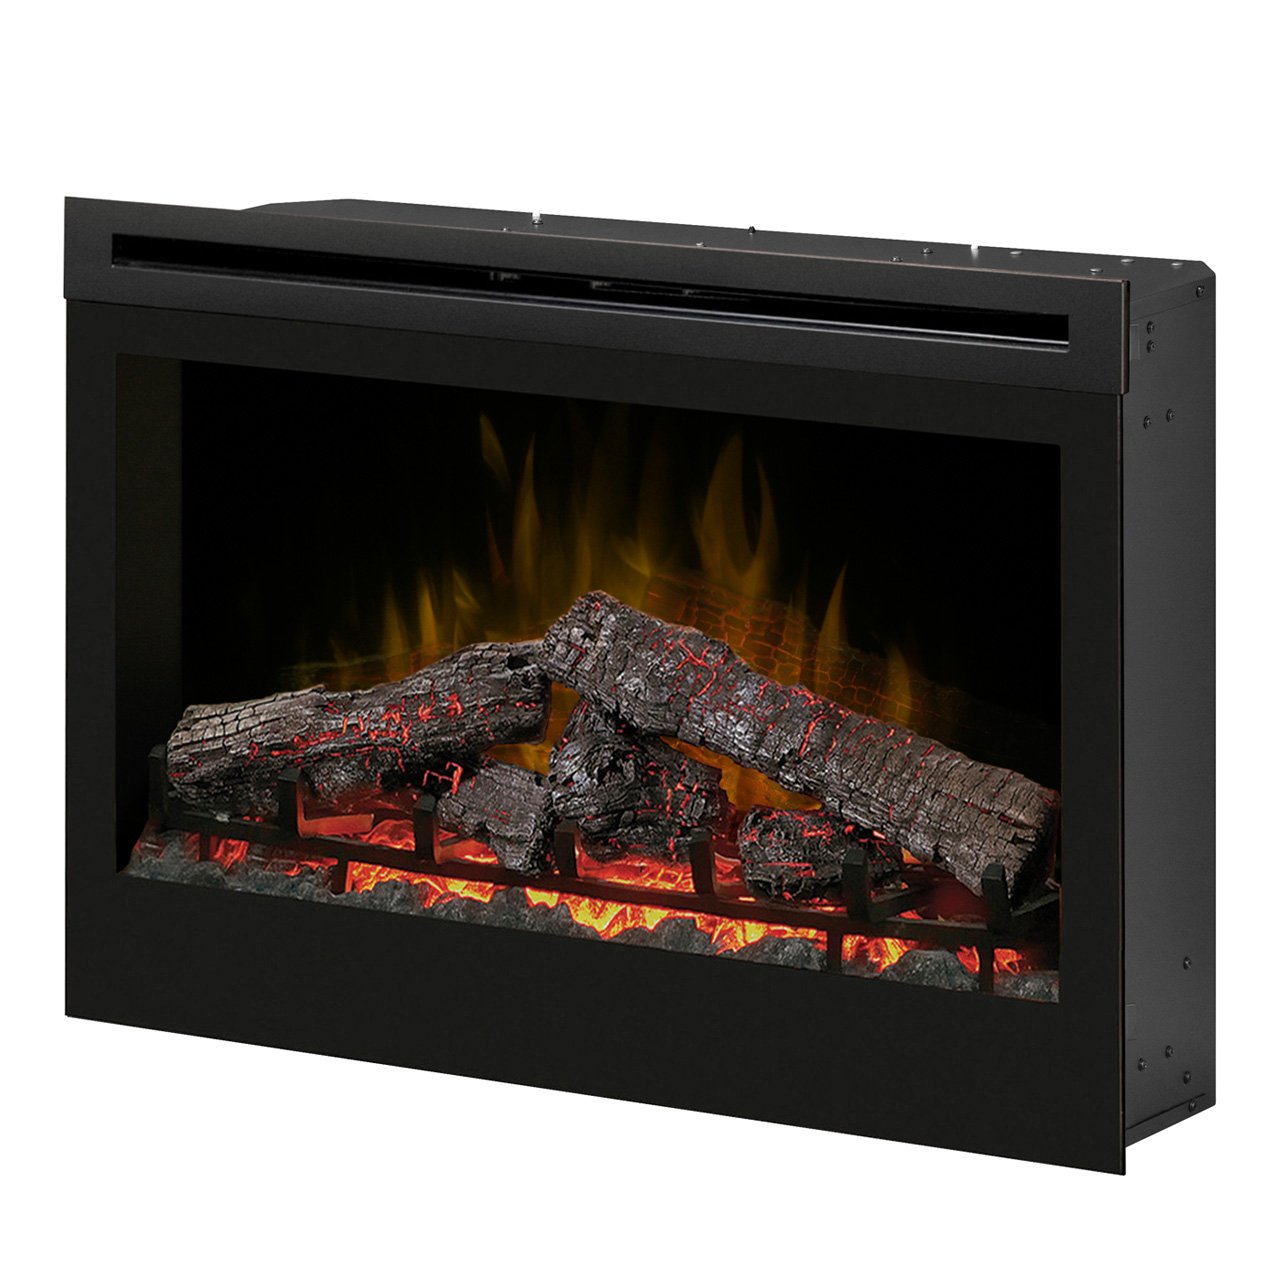 Home Electric Fireplace Elegant Dimplex Df3033st 33 Inch Self Trimming Electric Fireplace Insert